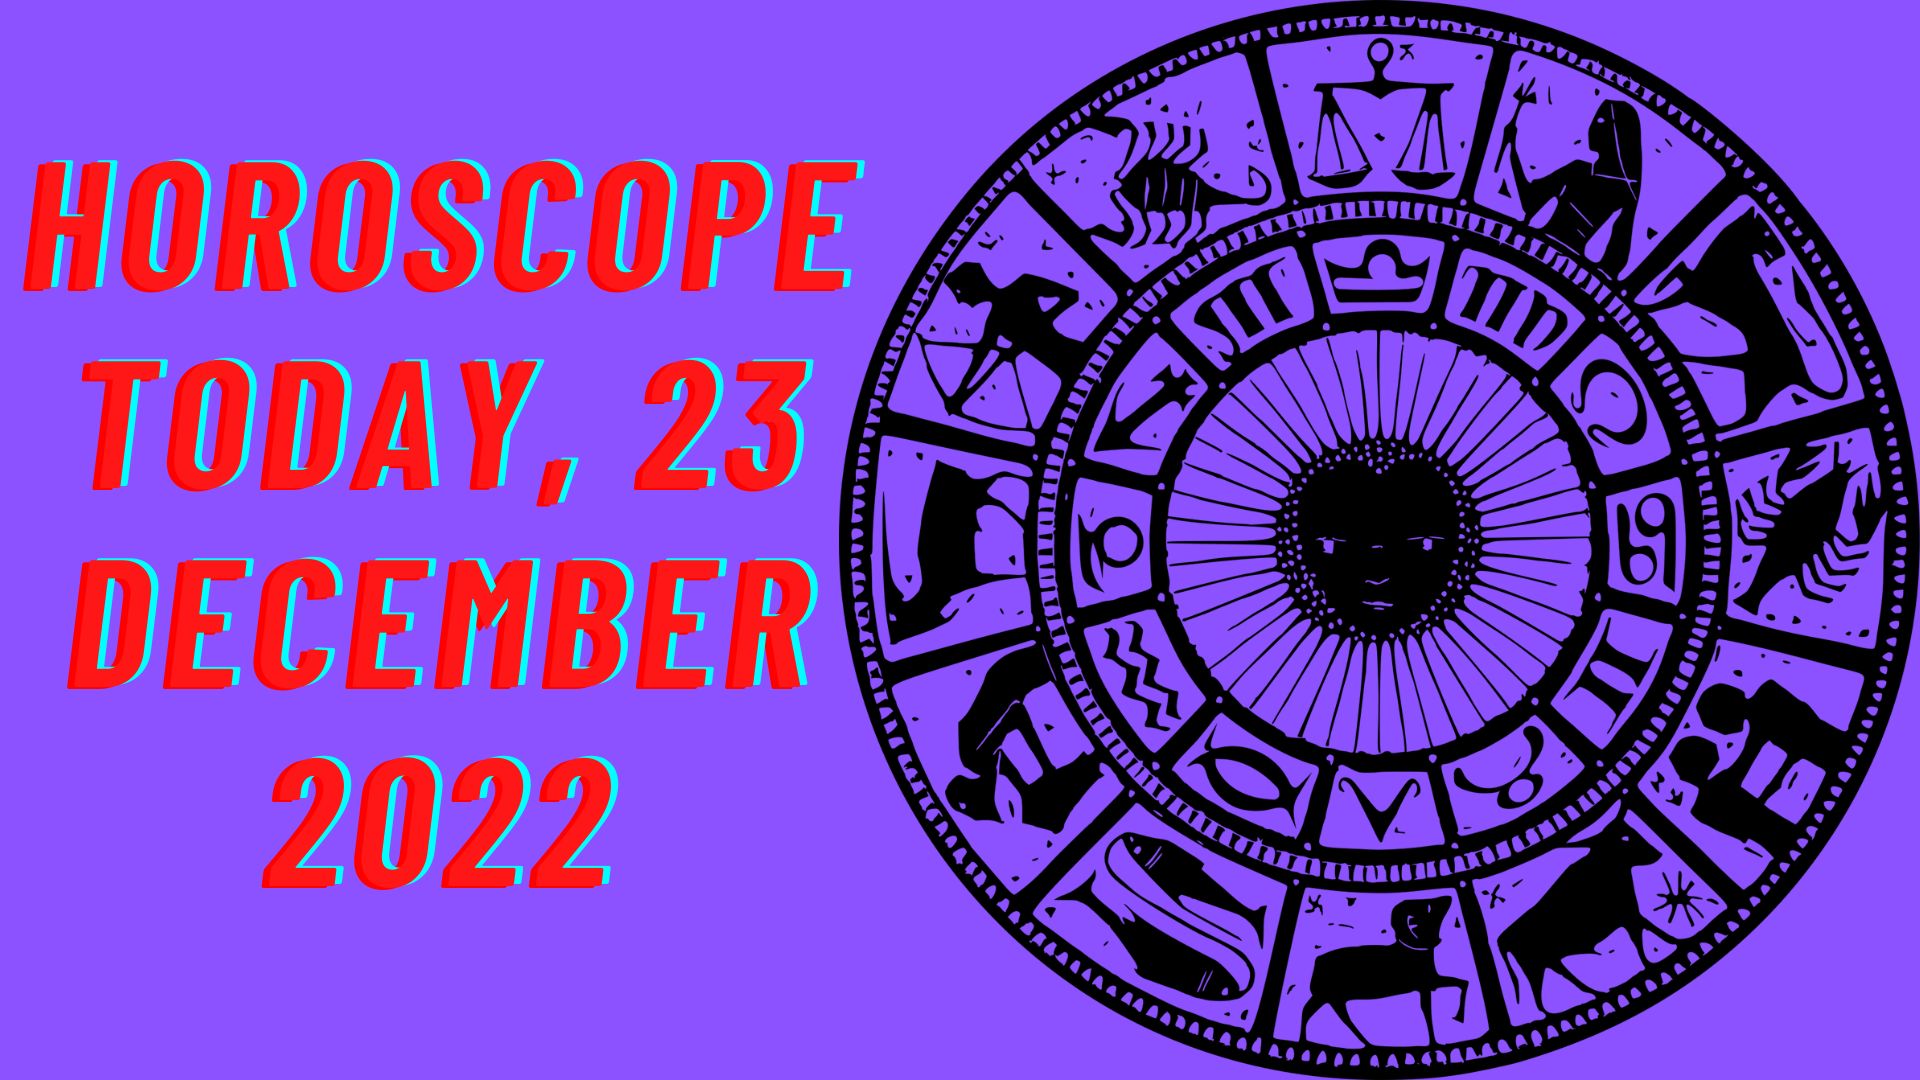 Horoscope Today, 23 December 2022 - Check Astrological Prediction Of Your Zodiac Sign